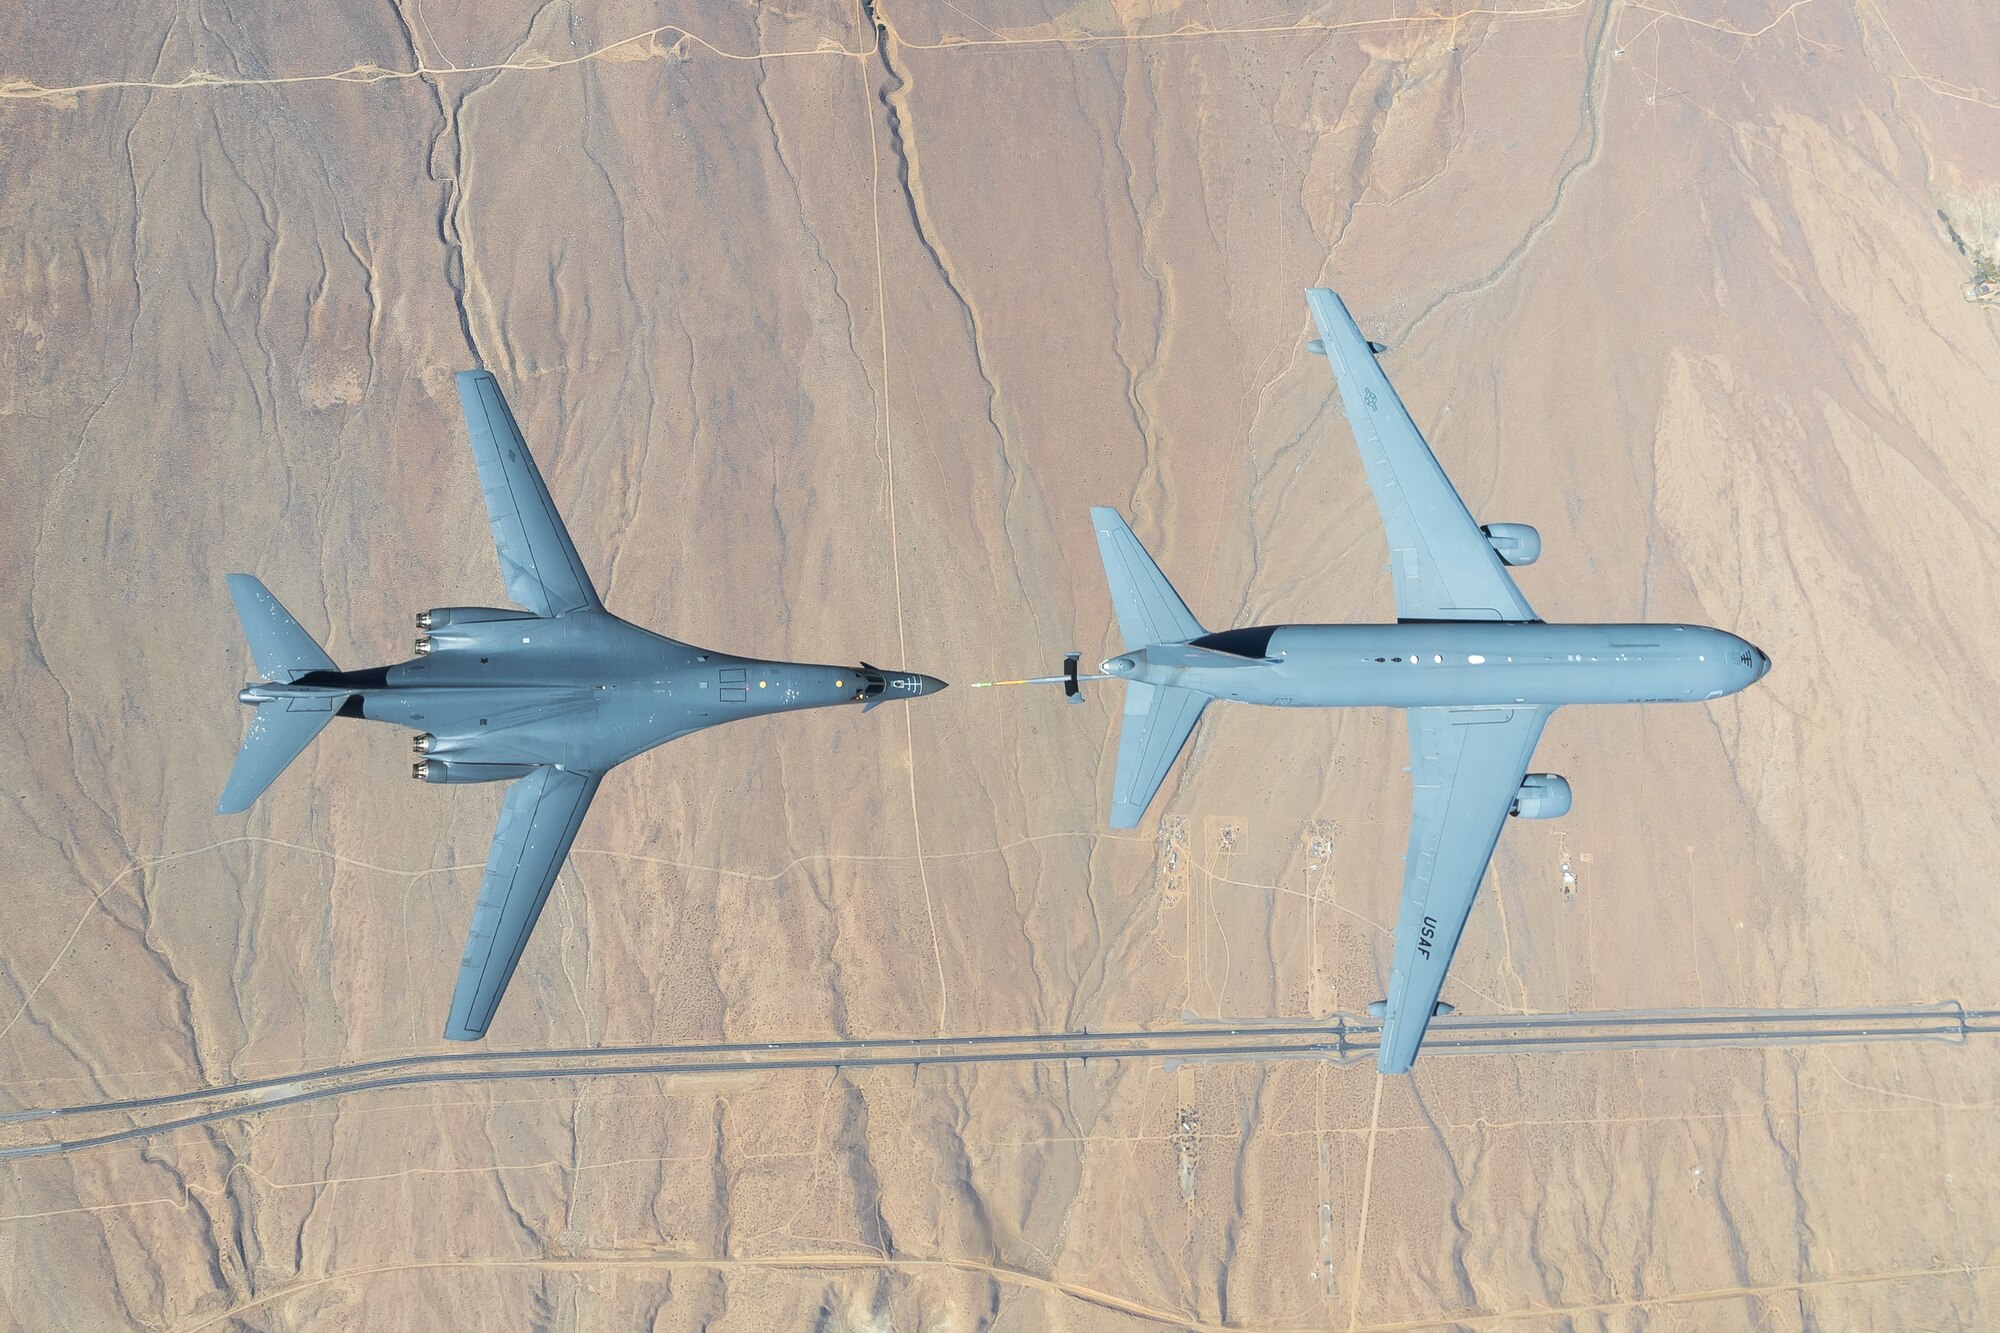 The B-1B Lancer conducted aerial testing with the KC-46 Pegasus in the skies over Edwards Air Force Base, California, recently. (Air Force photo by Don Allen)